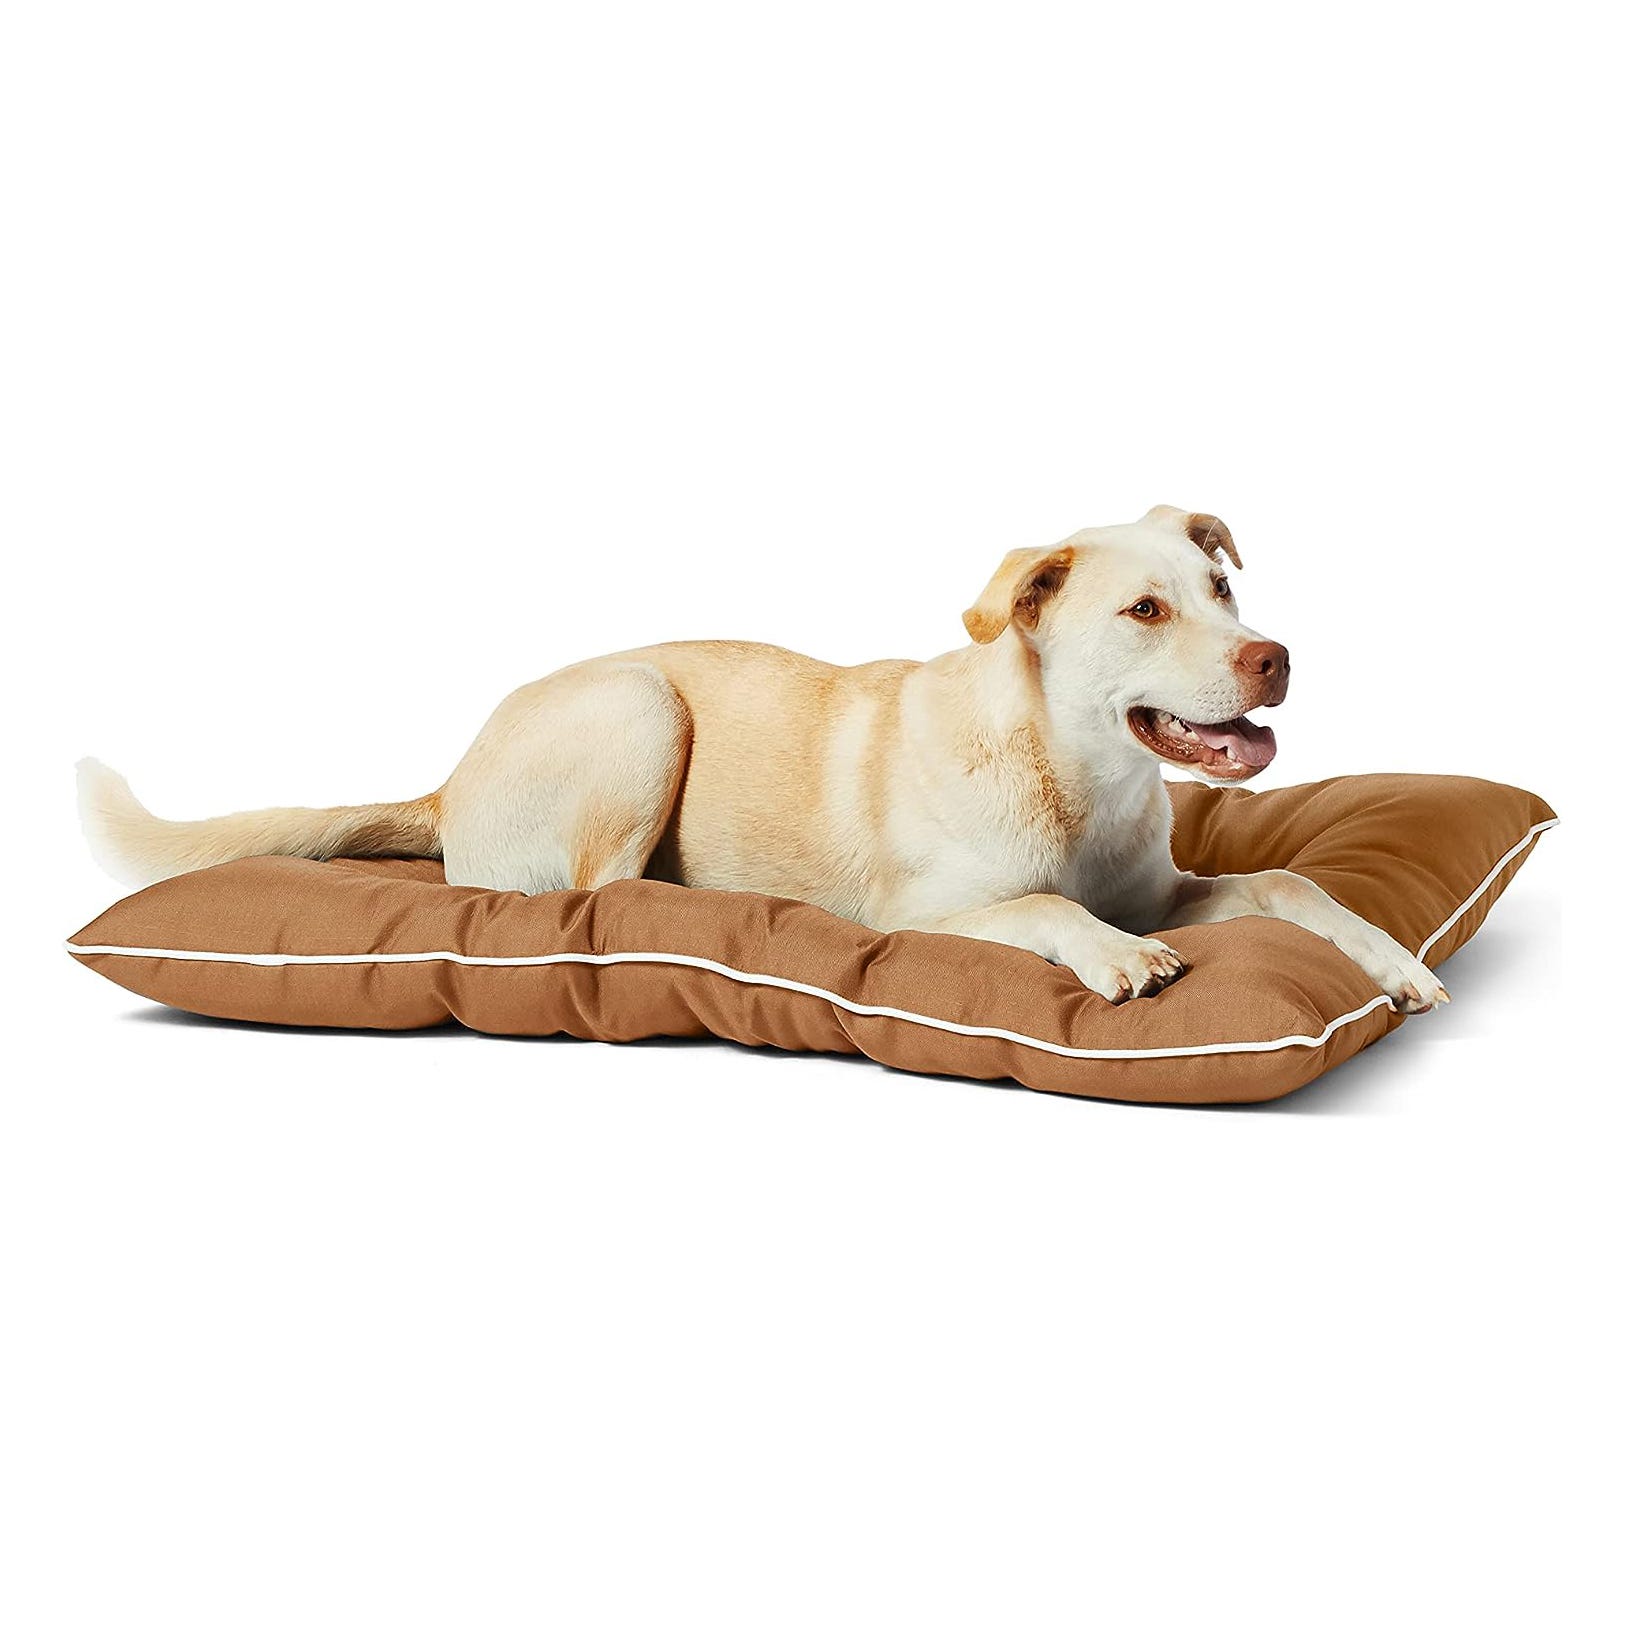 A light brown and white dog is lying on a brown dog bed.